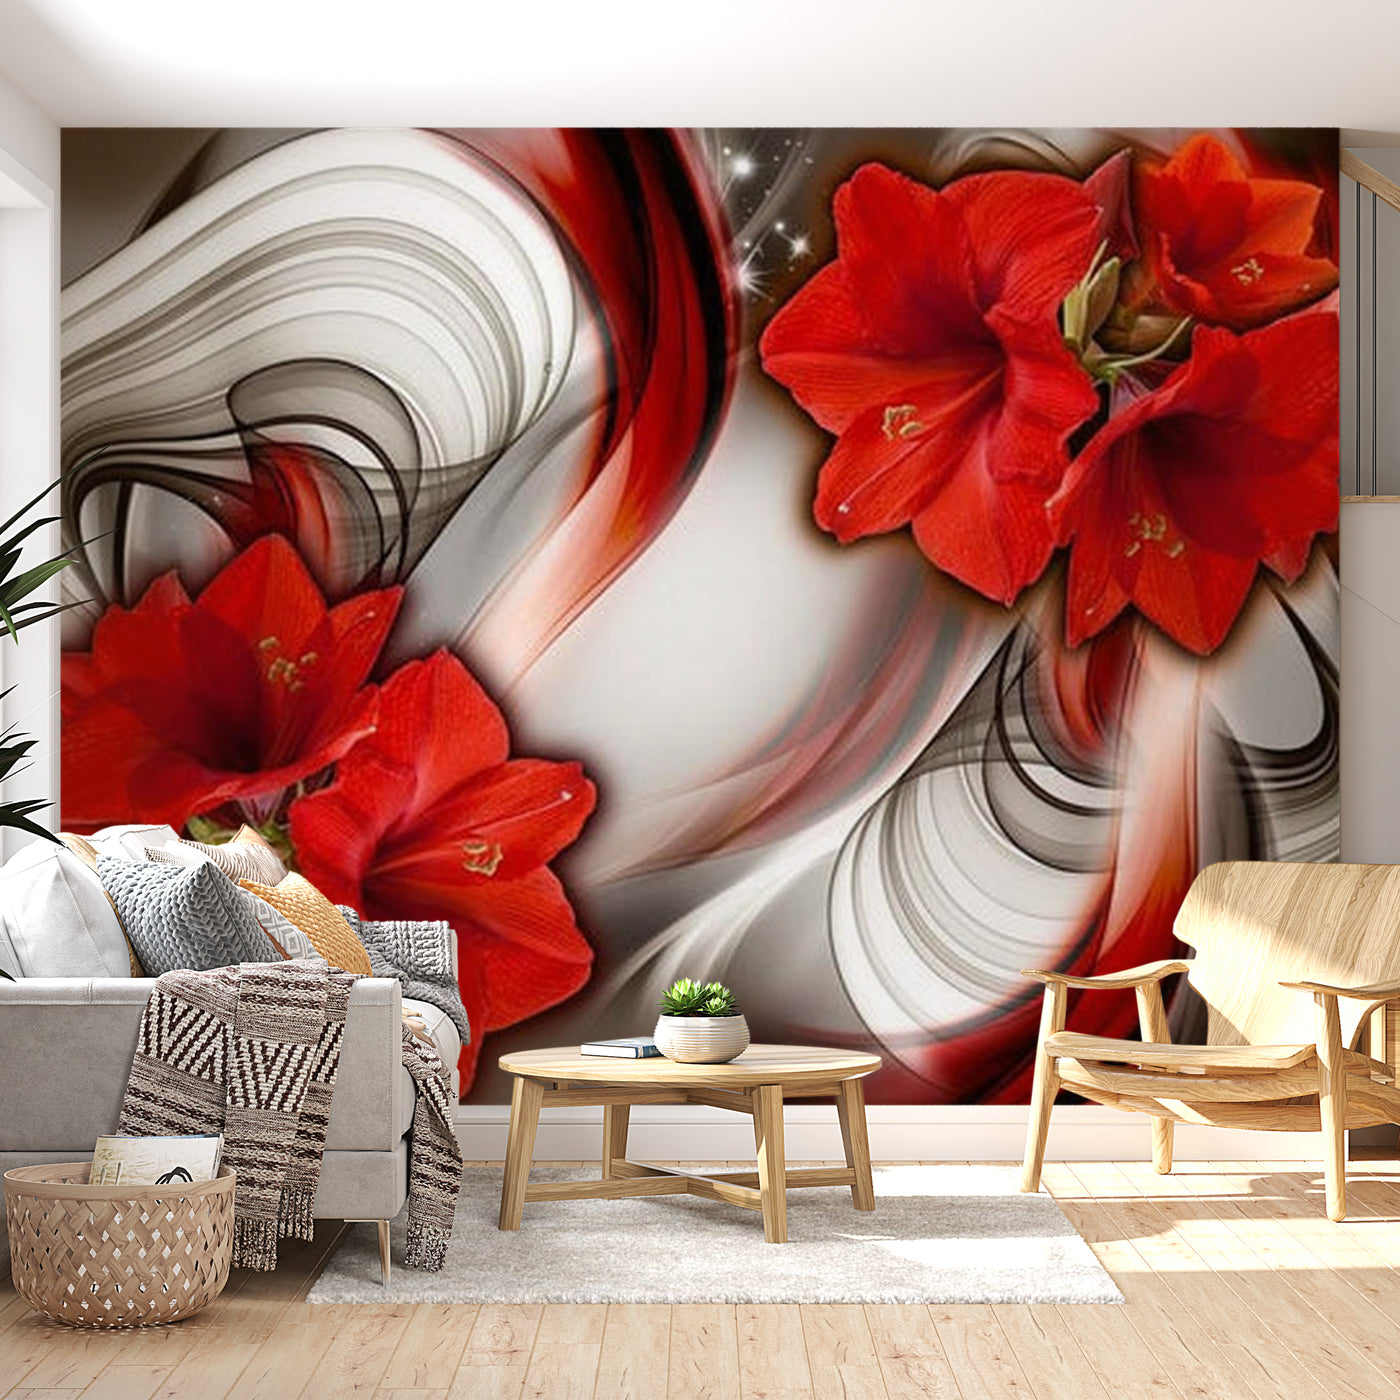 Floral Wallpaper Wall Mural - Red Amaryllis